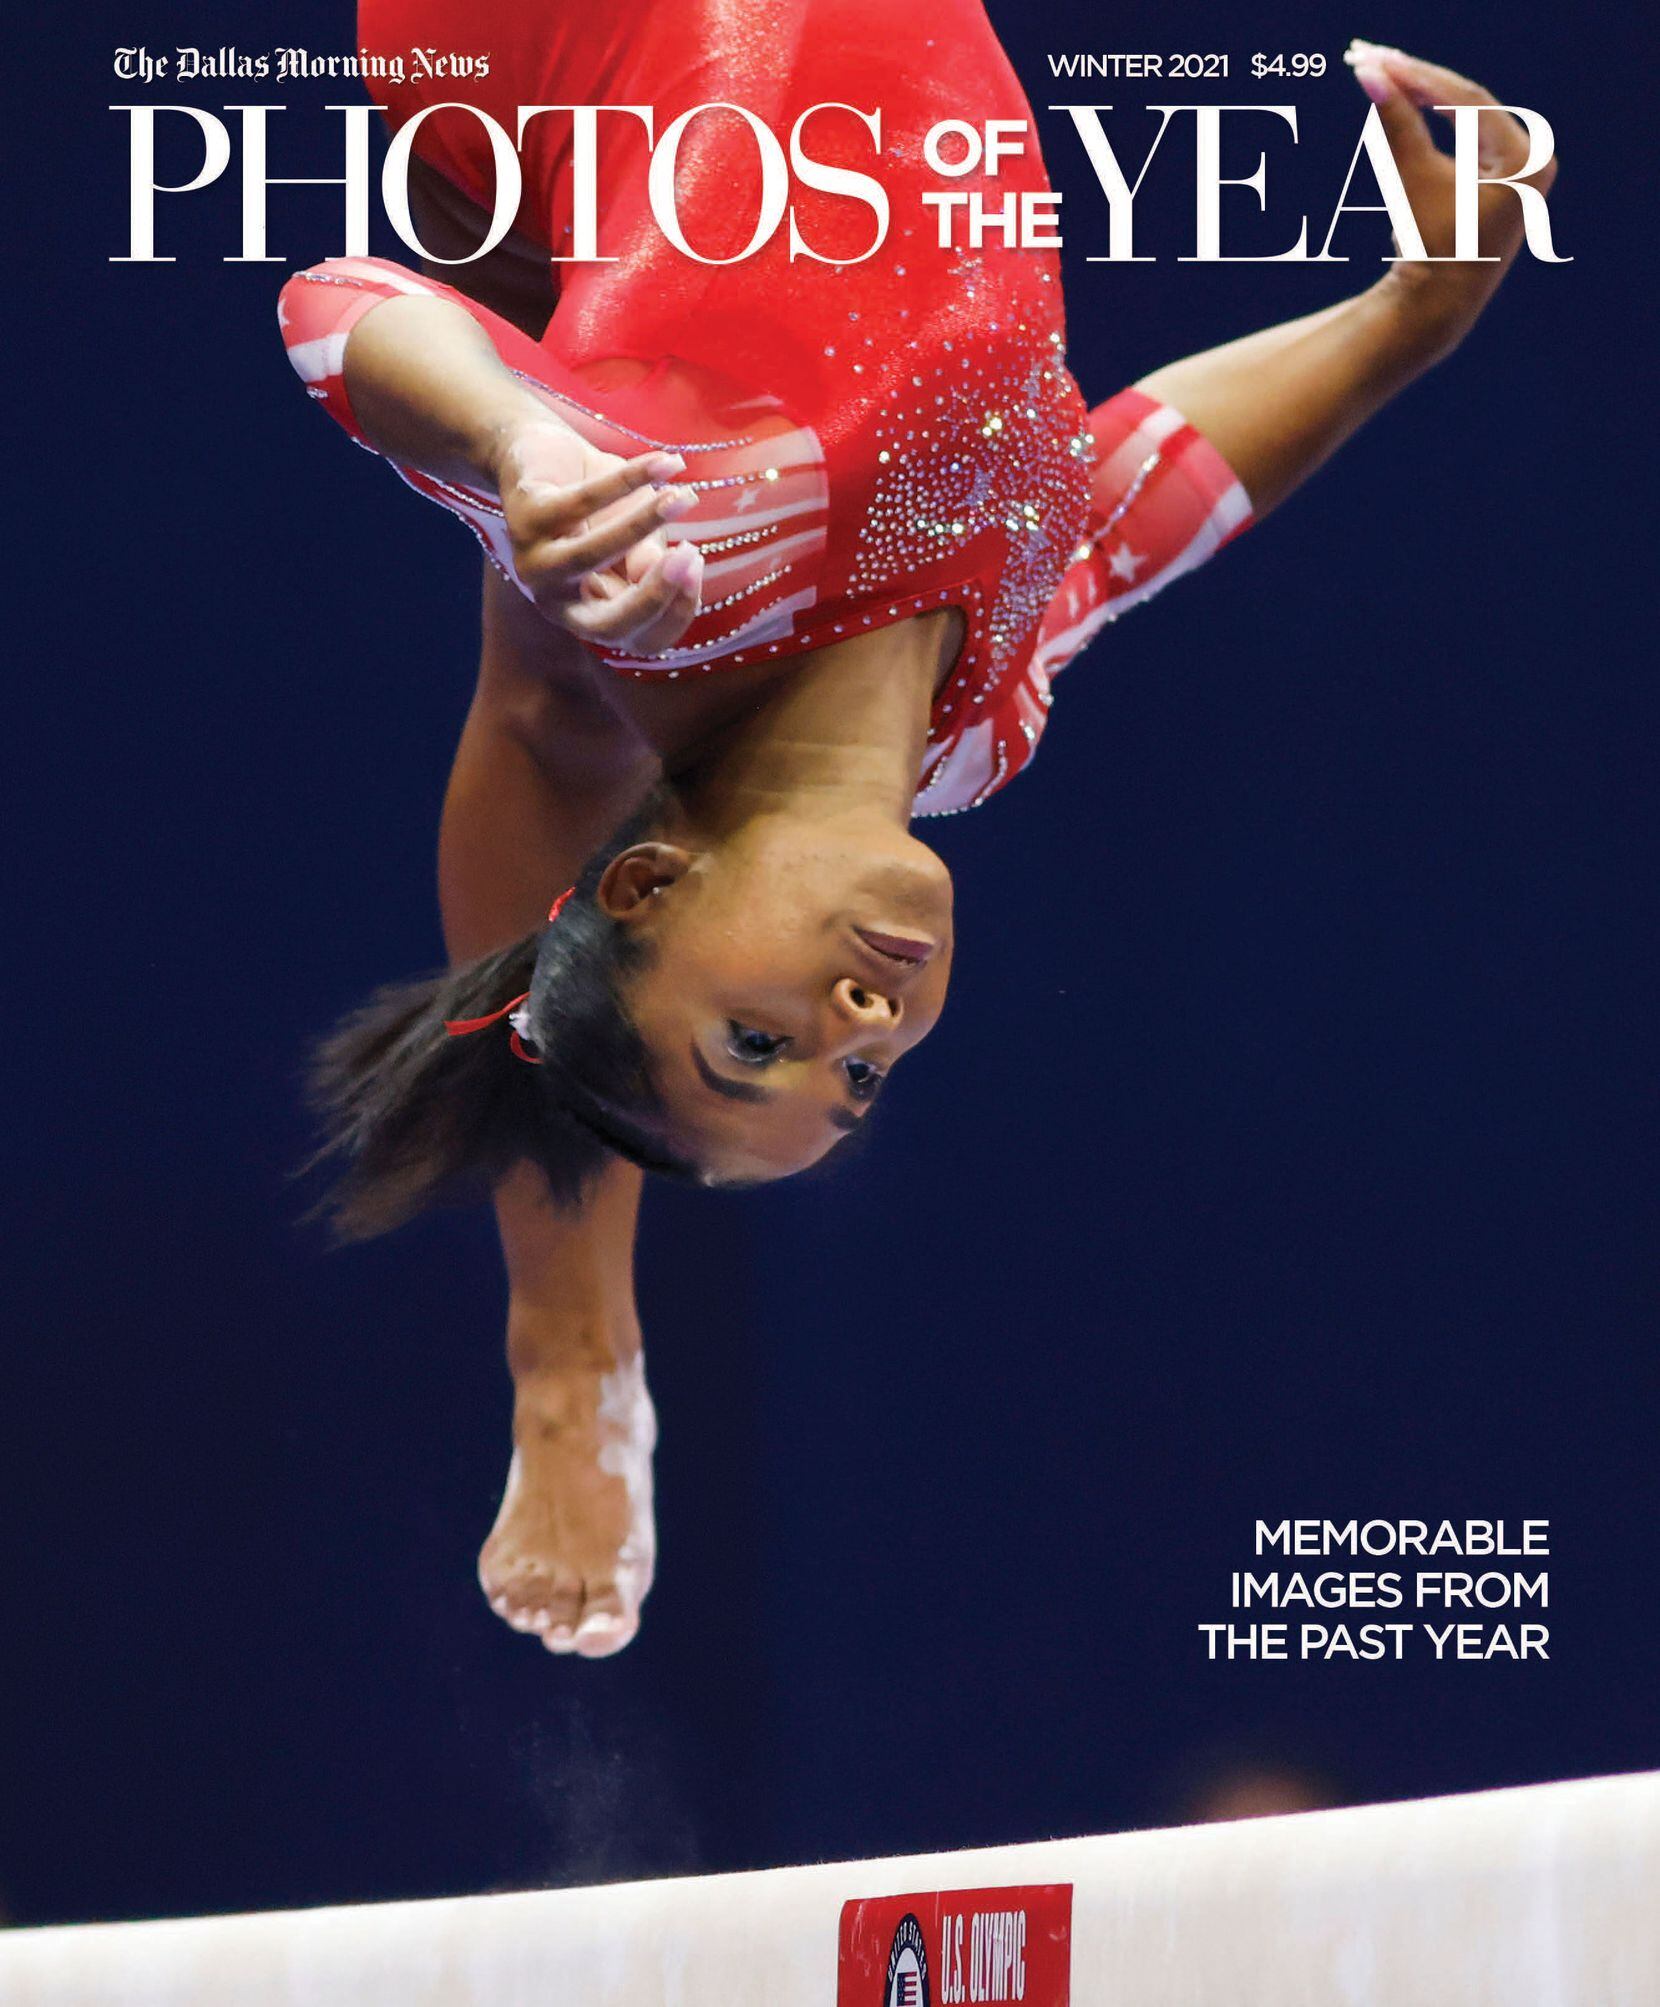 American gymnast Jordan Chiles competed on the balance beam during the women’s 2021 U.S. Gymnastics Olympic Trials in June at the Dome at America’s Center in St. Louis. She went on to represent the U.S. at the Summer Olympics in Tokyo.